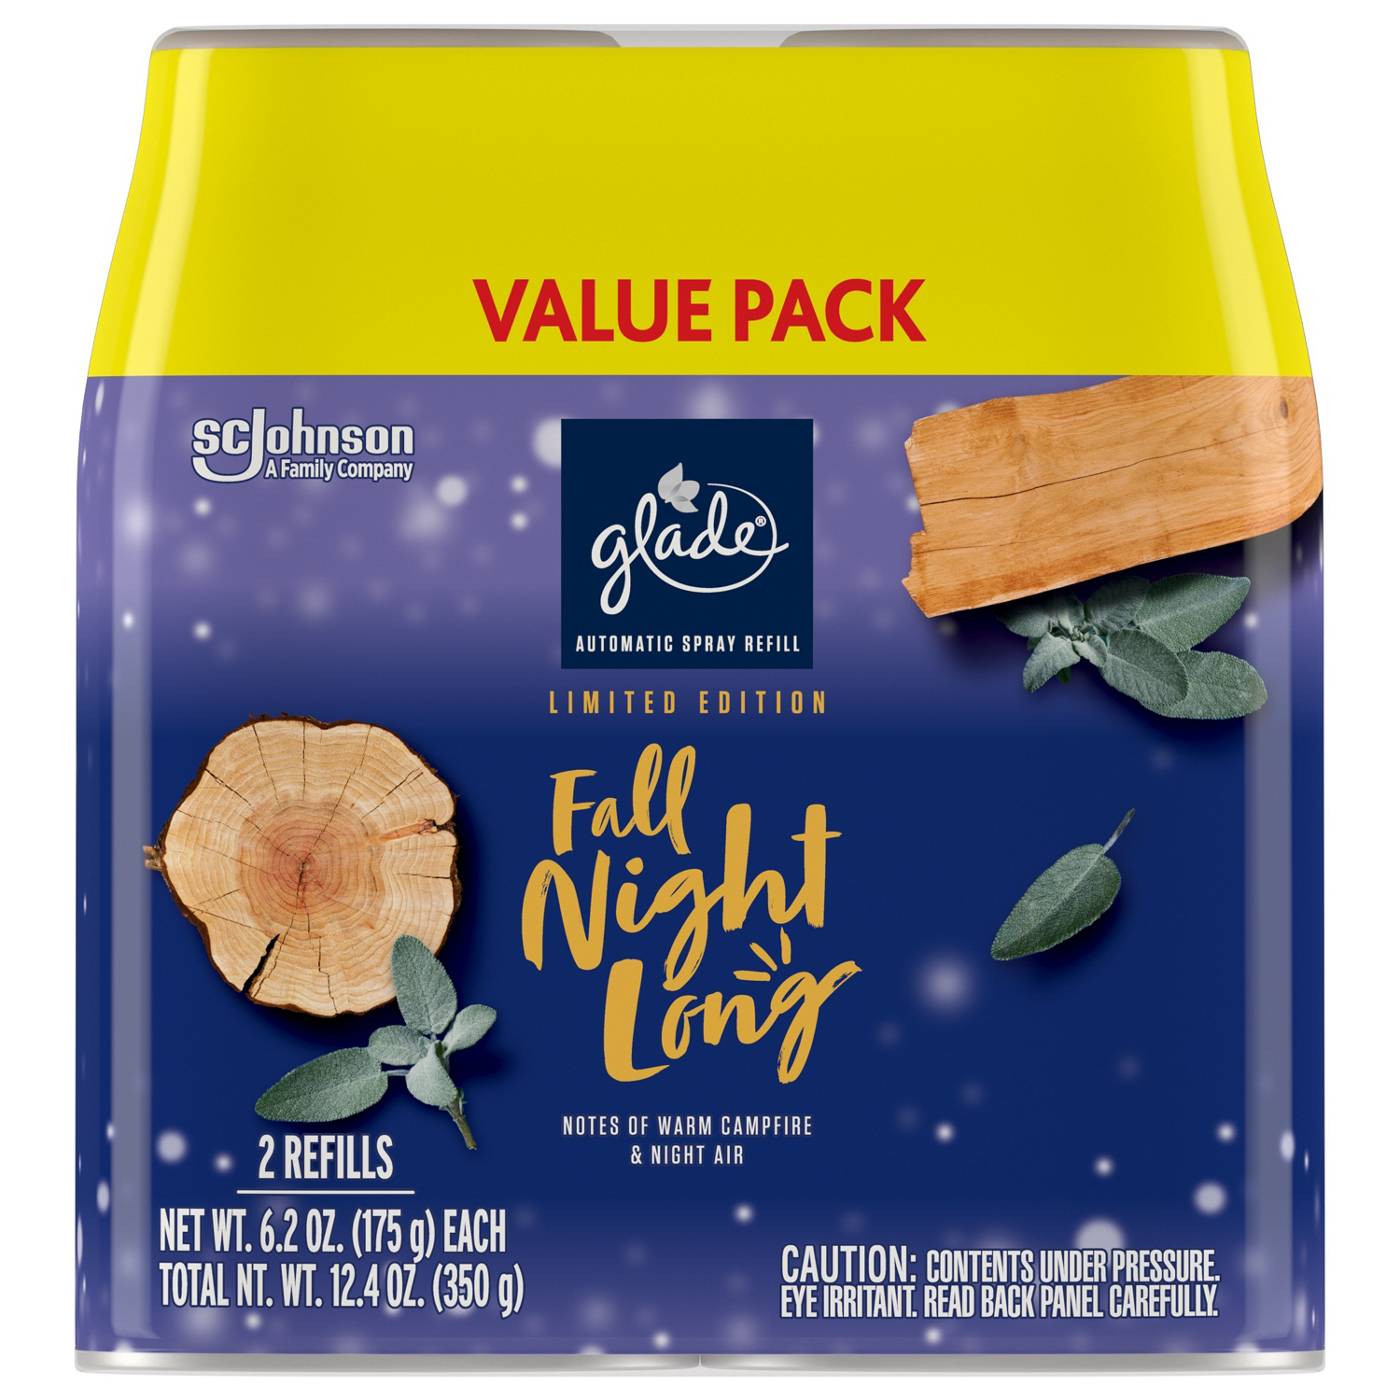 Glade Automatic Spray Refill Value Pack - Fall Night Long ; image 1 of 2